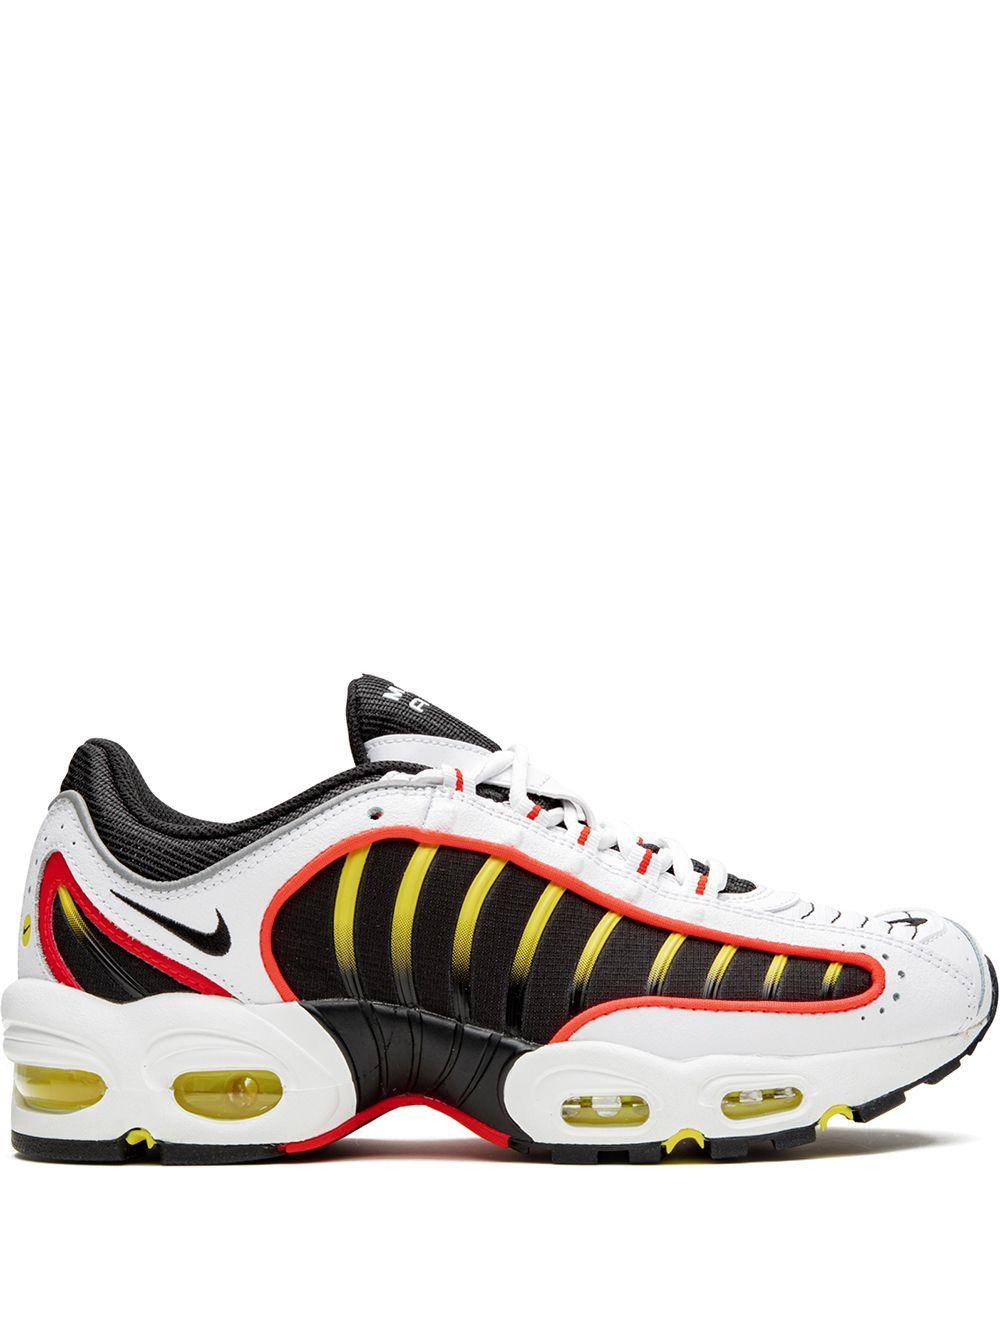 Nike Air Max Tailwind Iv Sneakers in Black (White) for Men - Save 56% | Lyst